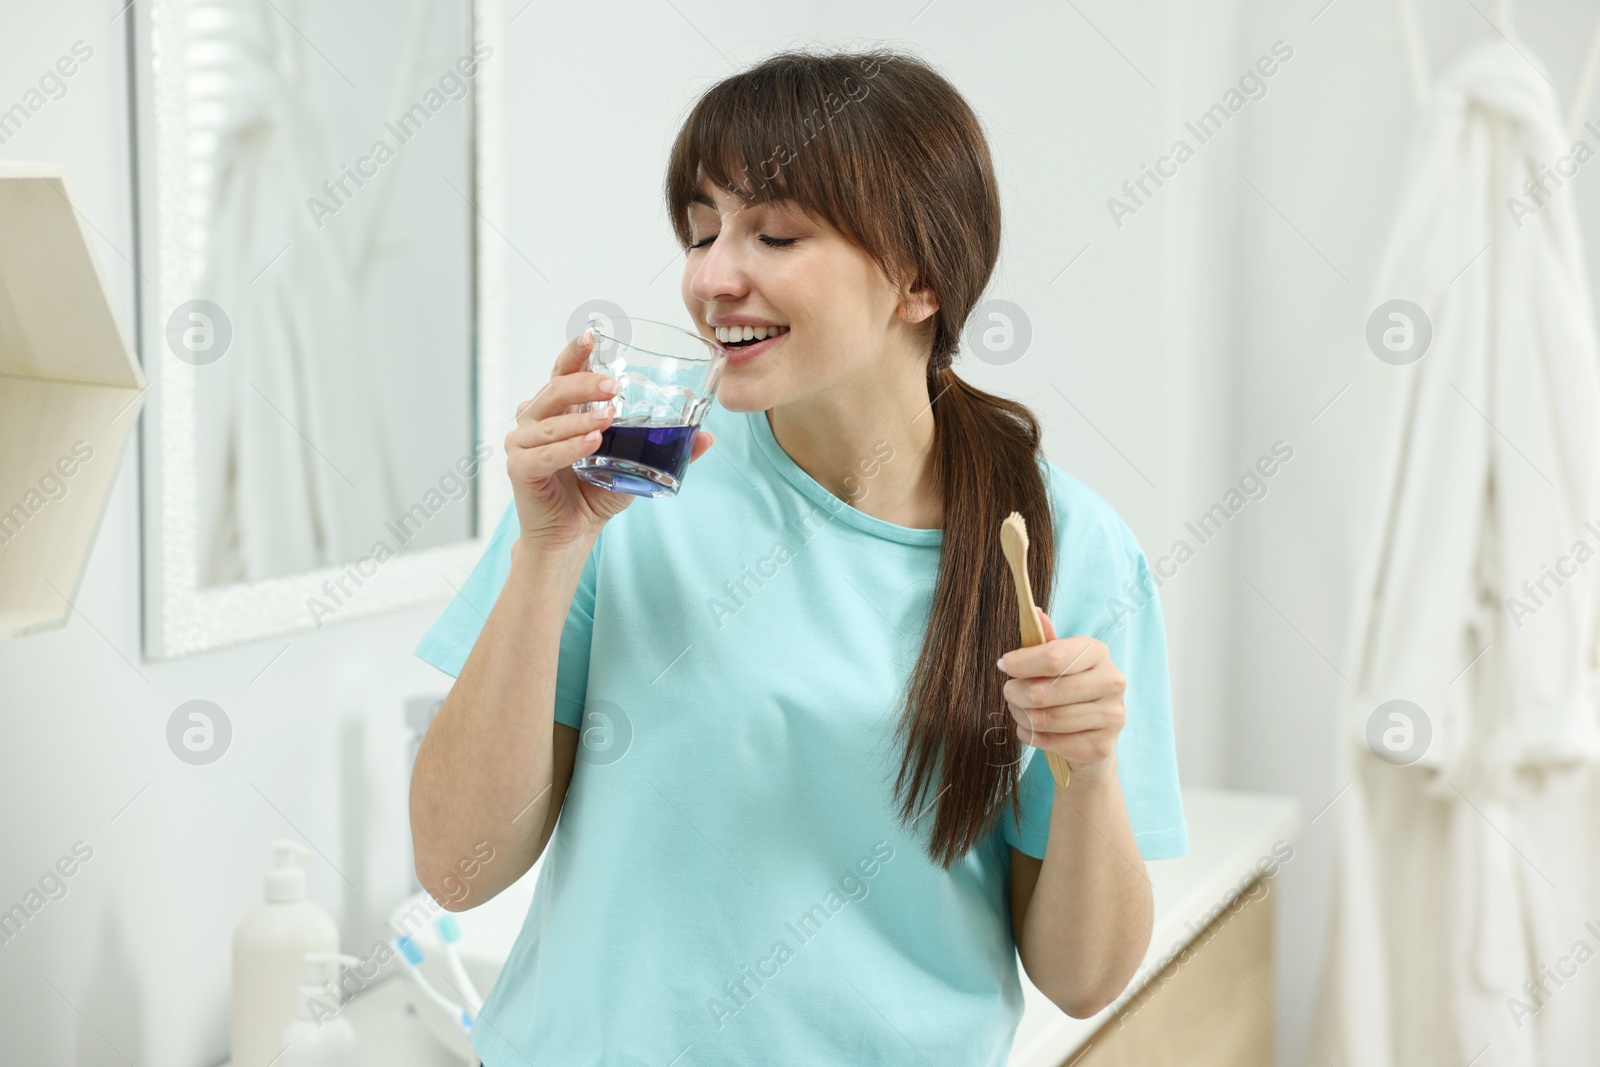 Photo of Young woman using mouthwash in bathroom. Oral hygiene